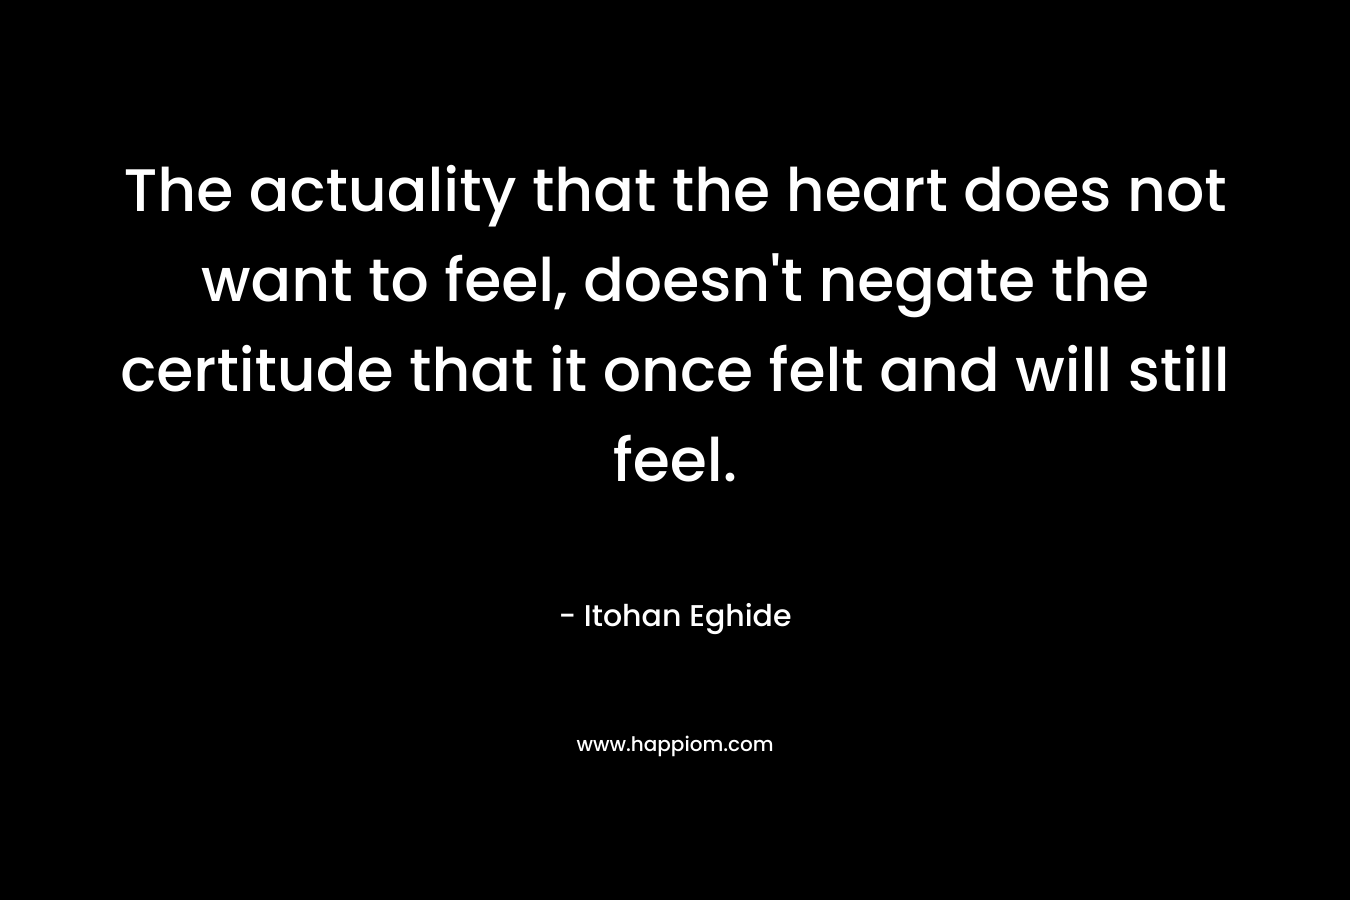 The actuality that the heart does not want to feel, doesn’t negate the certitude that it once felt and will still feel. – Itohan Eghide